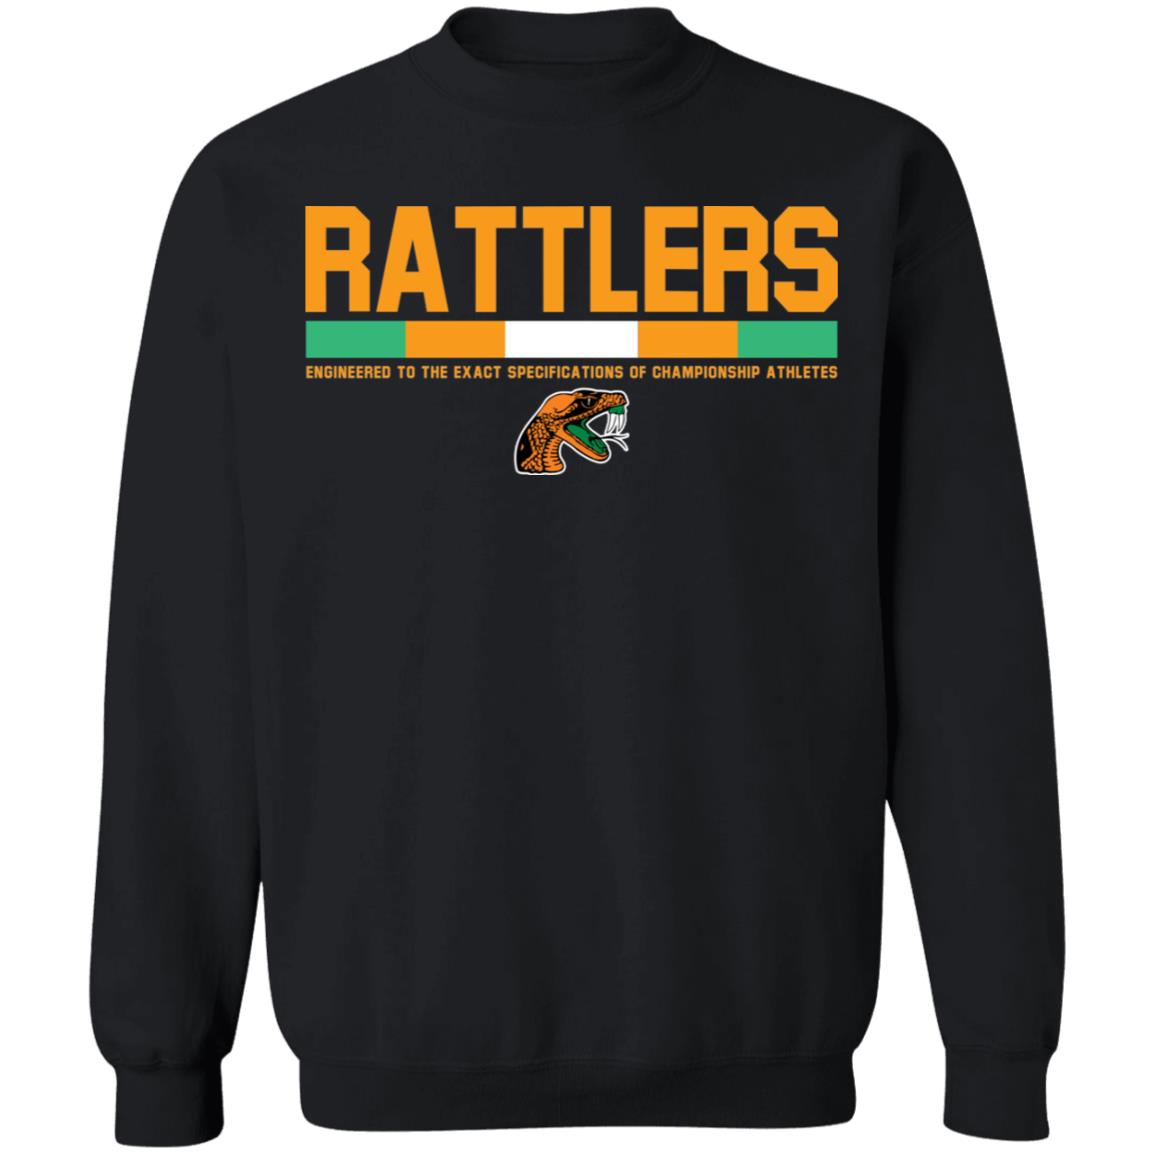 Lebron Rattlers Engineered To The Exact Specifications Shirt 2